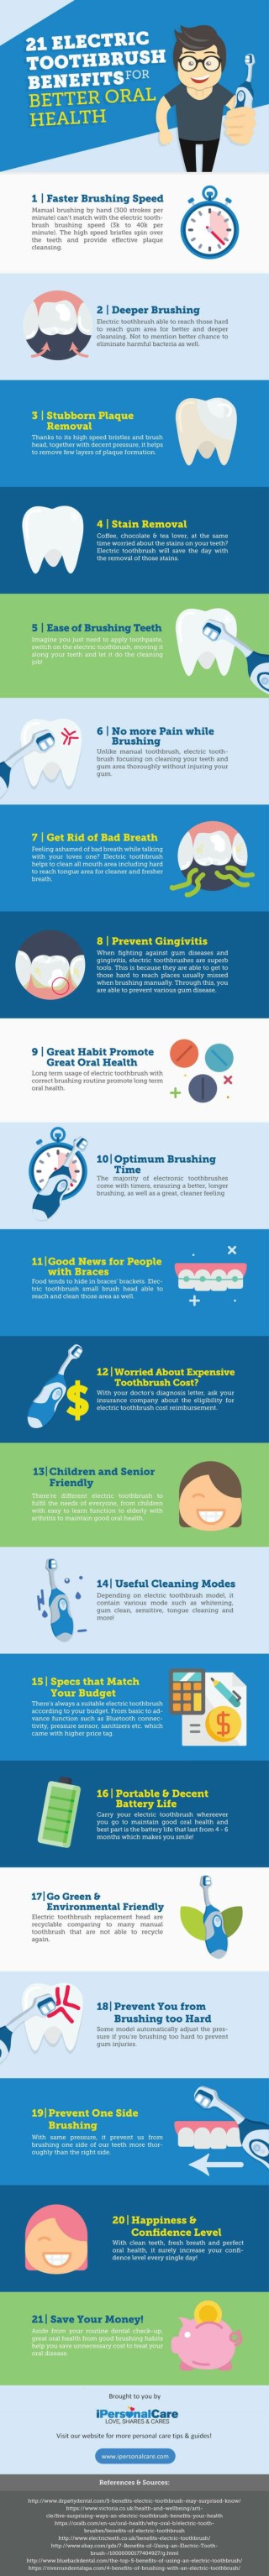 21 Electric Toothbrush Benefits for Overall Oral Health Improvement